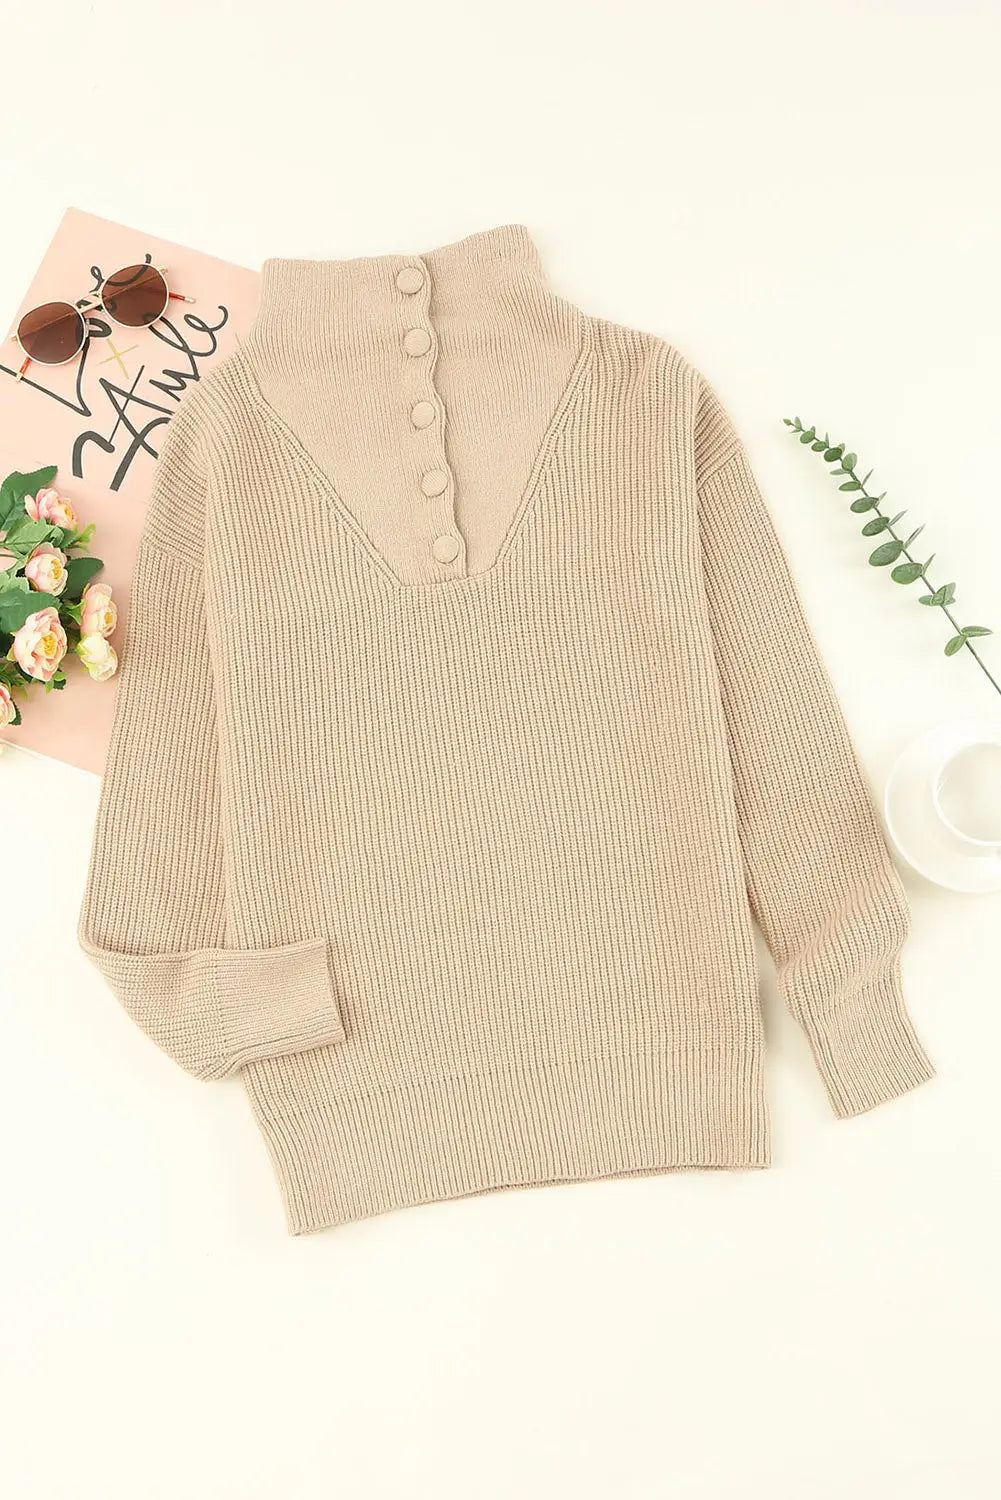 Khaki buttoned turn down collar comfy ribbed sweater - sweaters & cardigans